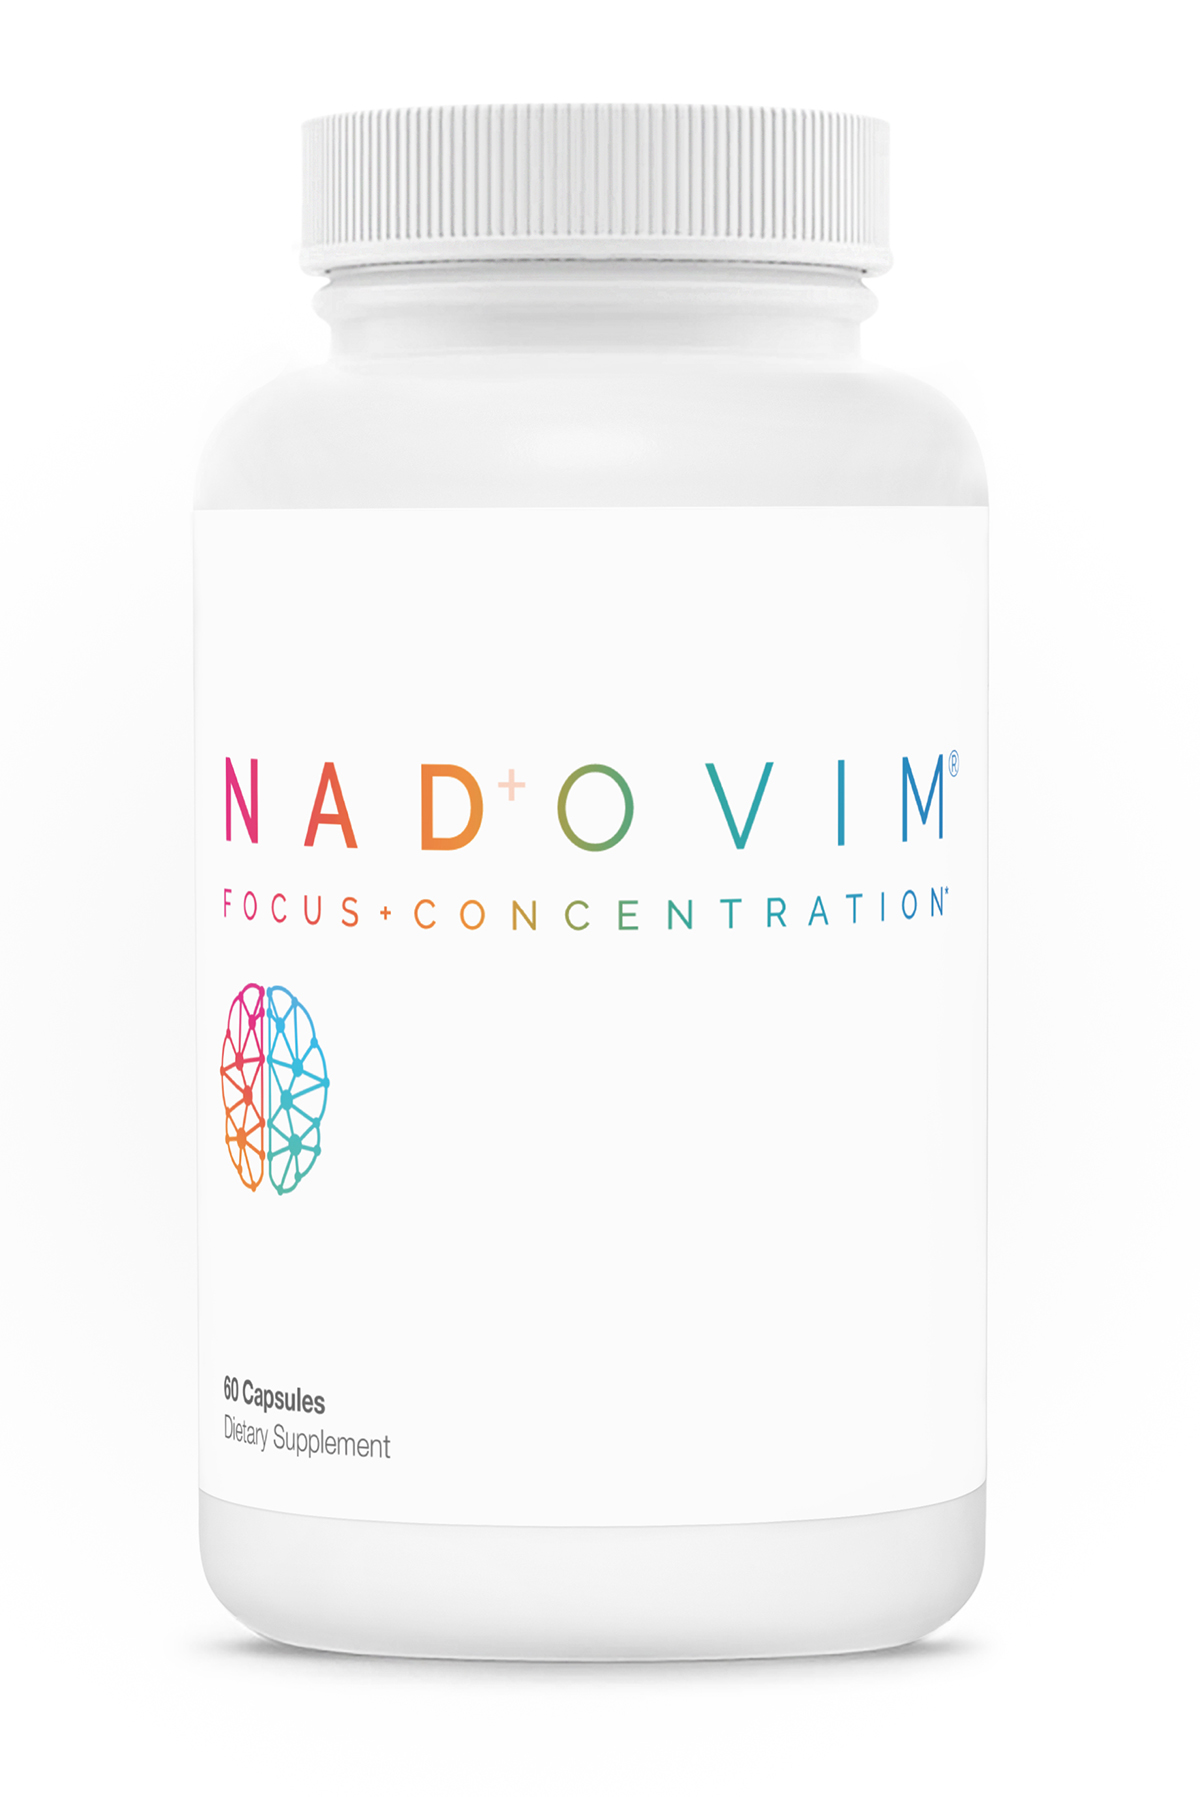 Each bottle contains 60 capsules and it is available for purchase on https://nadovim.com/ for $89 per bottle.